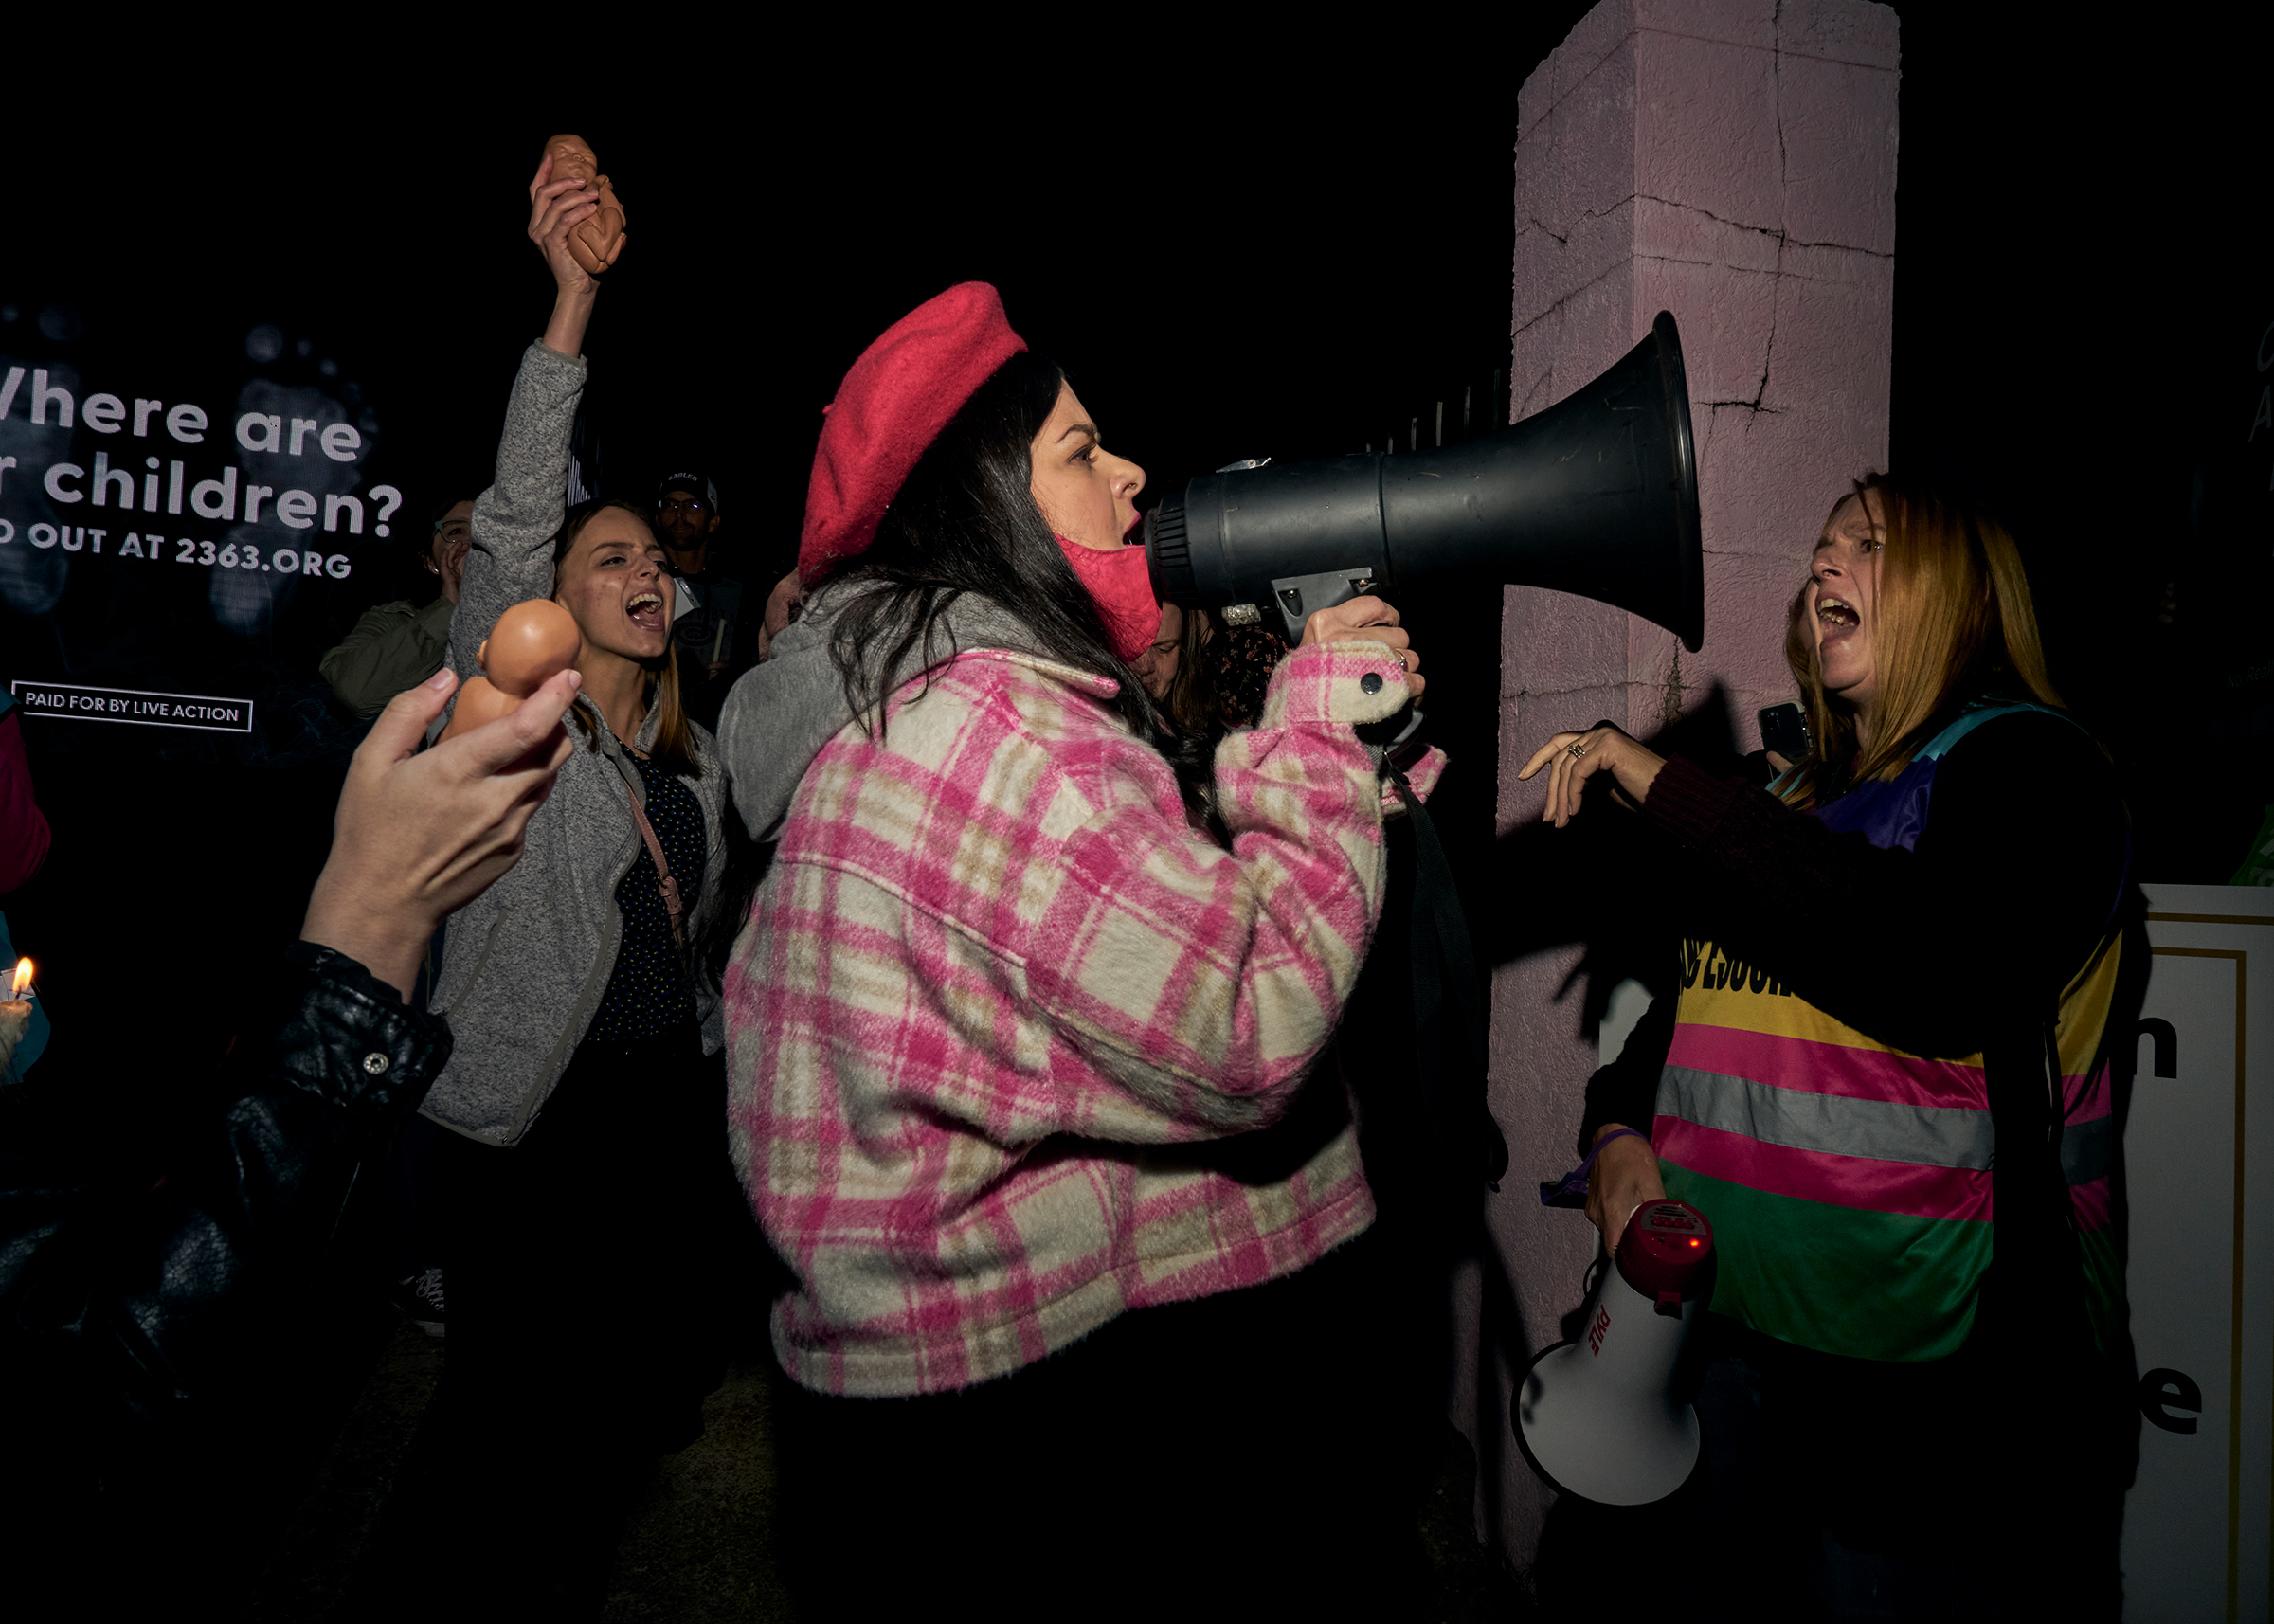 At the Live Action anti-abortion candlelight vigil at Jackson Women's Health Organization on Oct. 29, Kim Gibson (right), clinic escort and co-organizer of the Pink House Defenders, stands in front of the clinic as Terrisa Bukovinac (founder and Executive Director of the Progressive Anti-Abortion Uprising) uses a bullhorn to speak out against abortion (Stacy Kranitz for TIME)